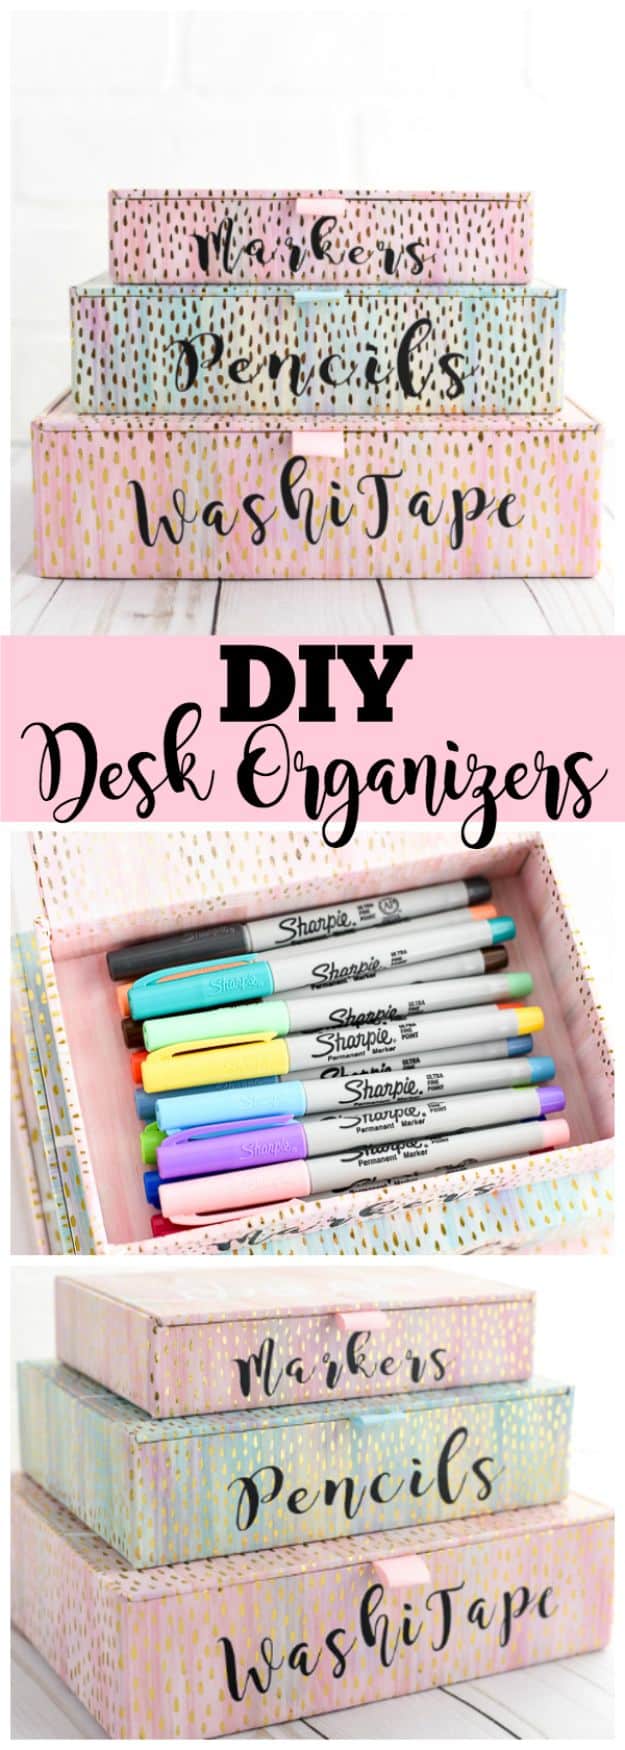 Organizing Ideas for Your Life - DIY Desk Organizers - Easy Crafts and Cool Ideas for Getting Organized - Best Ways to Get Organized - Things to Make for Being More Efficient and Productive - DIY Storage, Shelving, Calendars, Planning #organizing